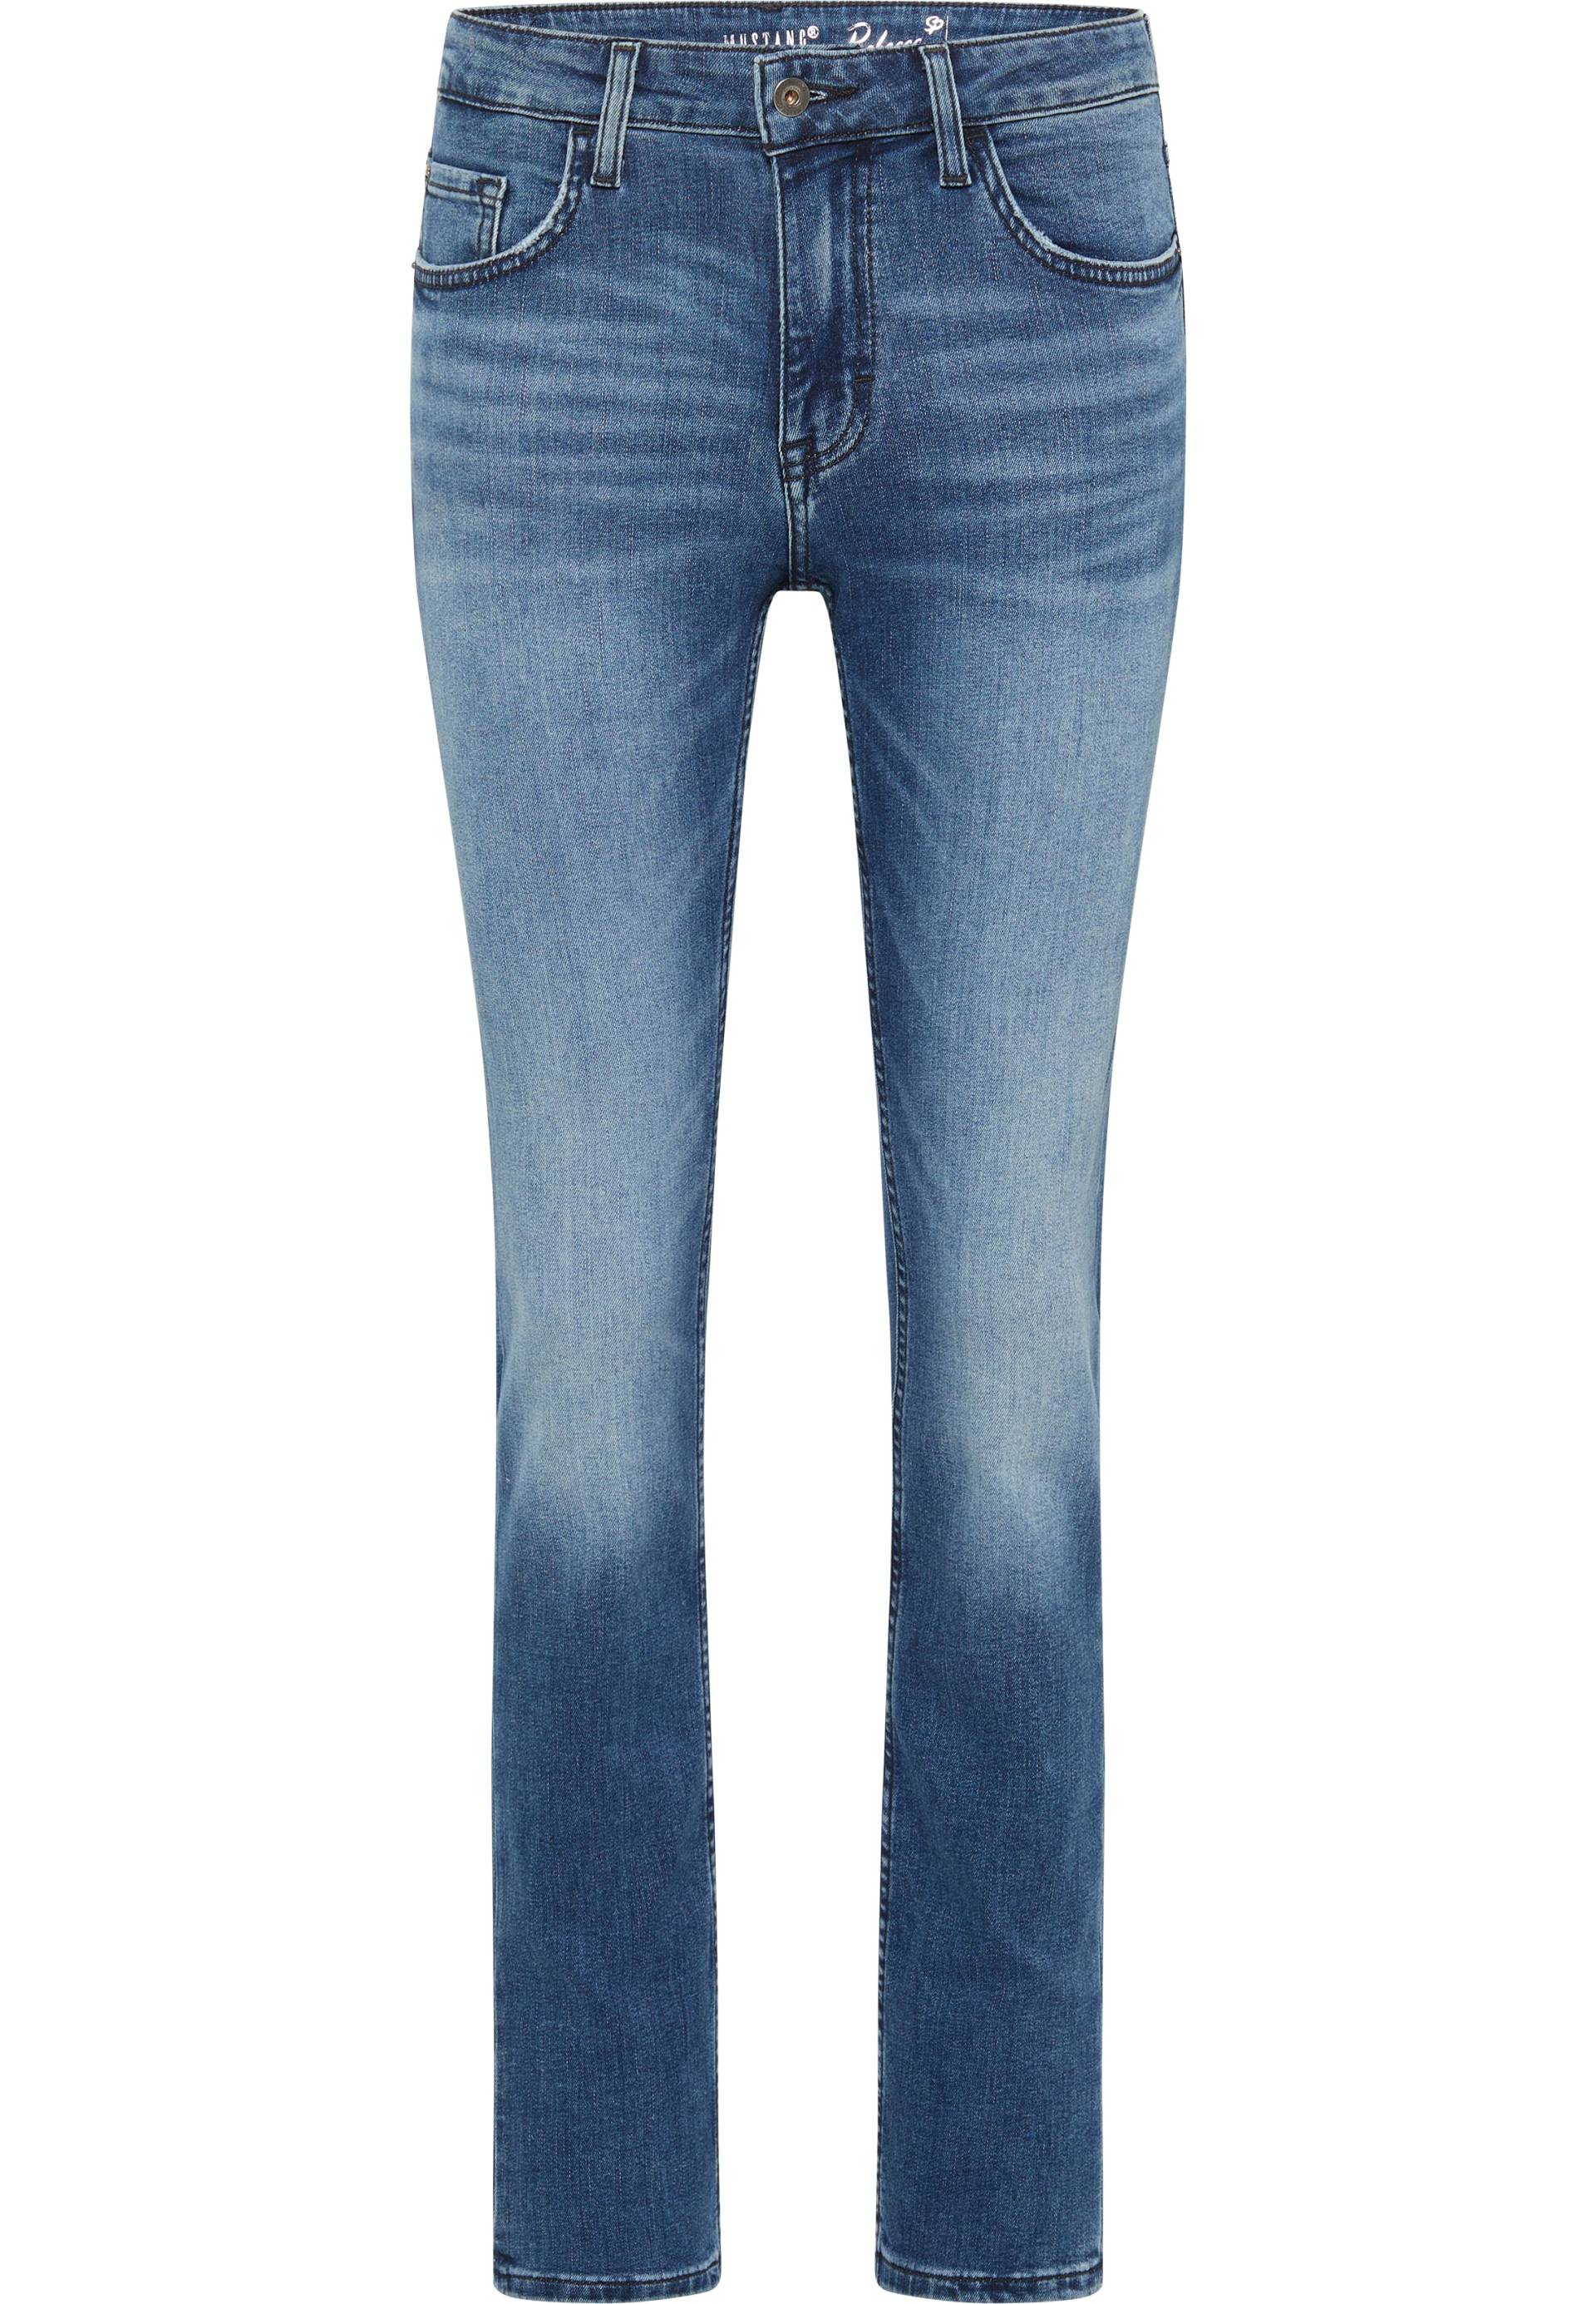 MUSTANG Stretch-Jeans »Rebecca« von mustang